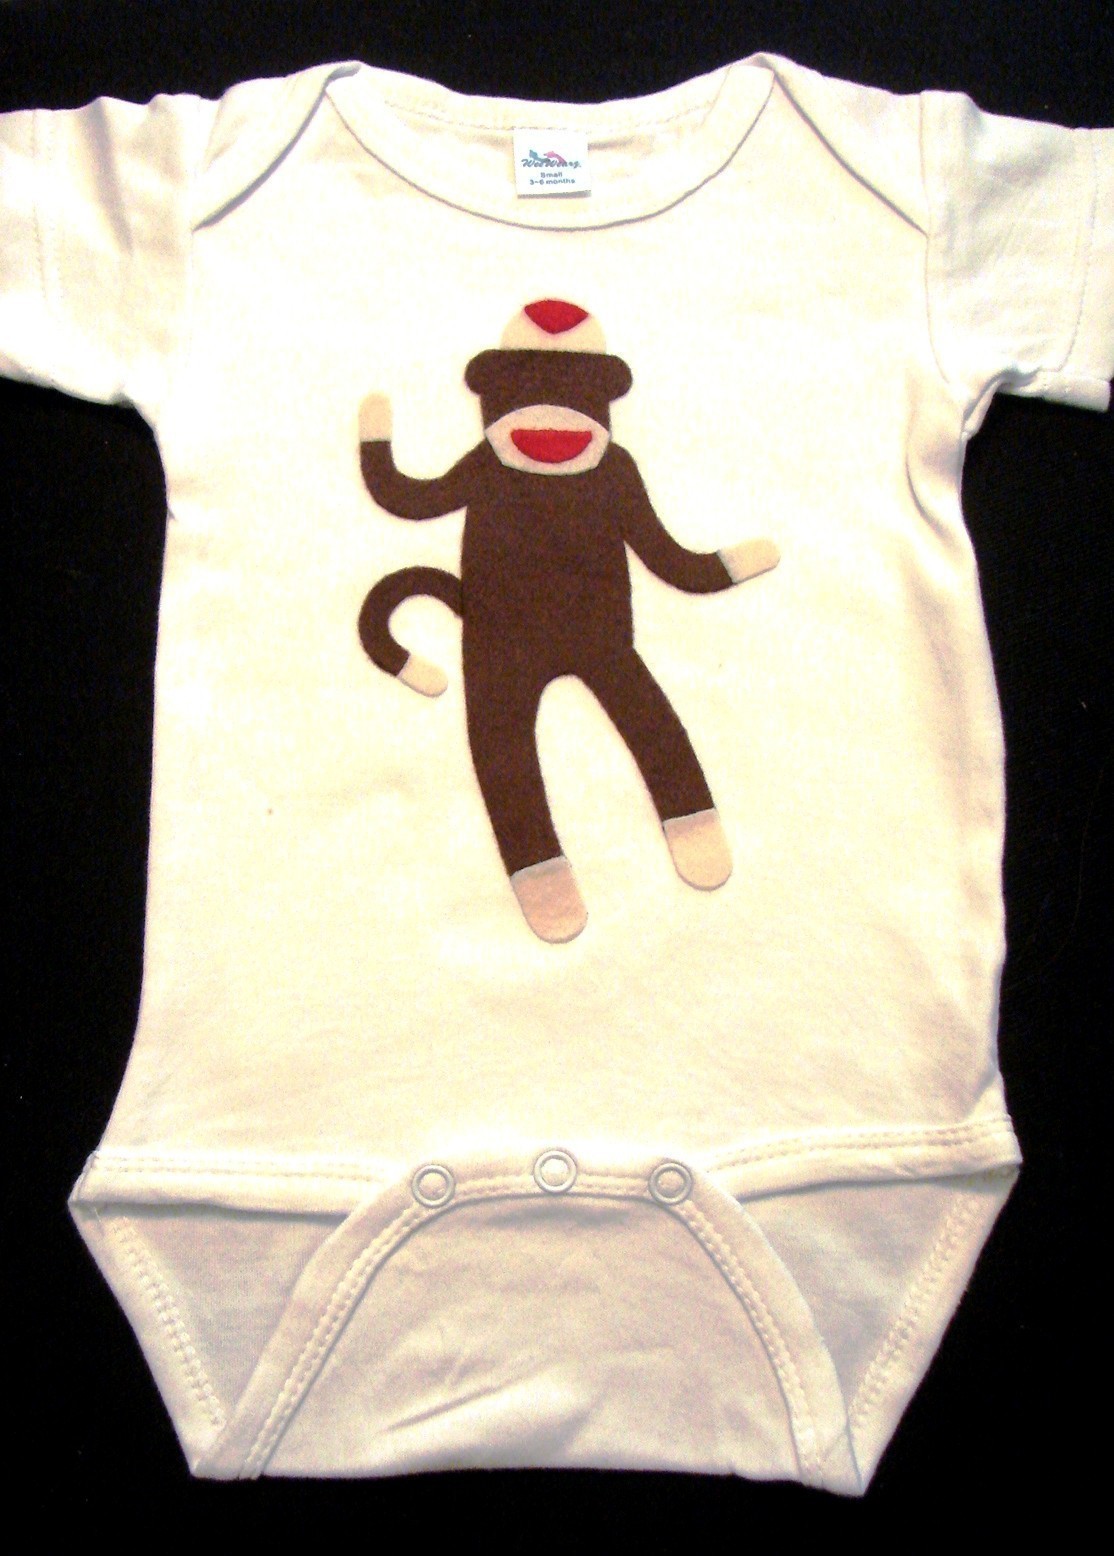 http://www.kitschy-kitschy-coo.com/uploaded_images/sock-monkey-hand-made-felt-applique-childrens-clothing-755740.jpg